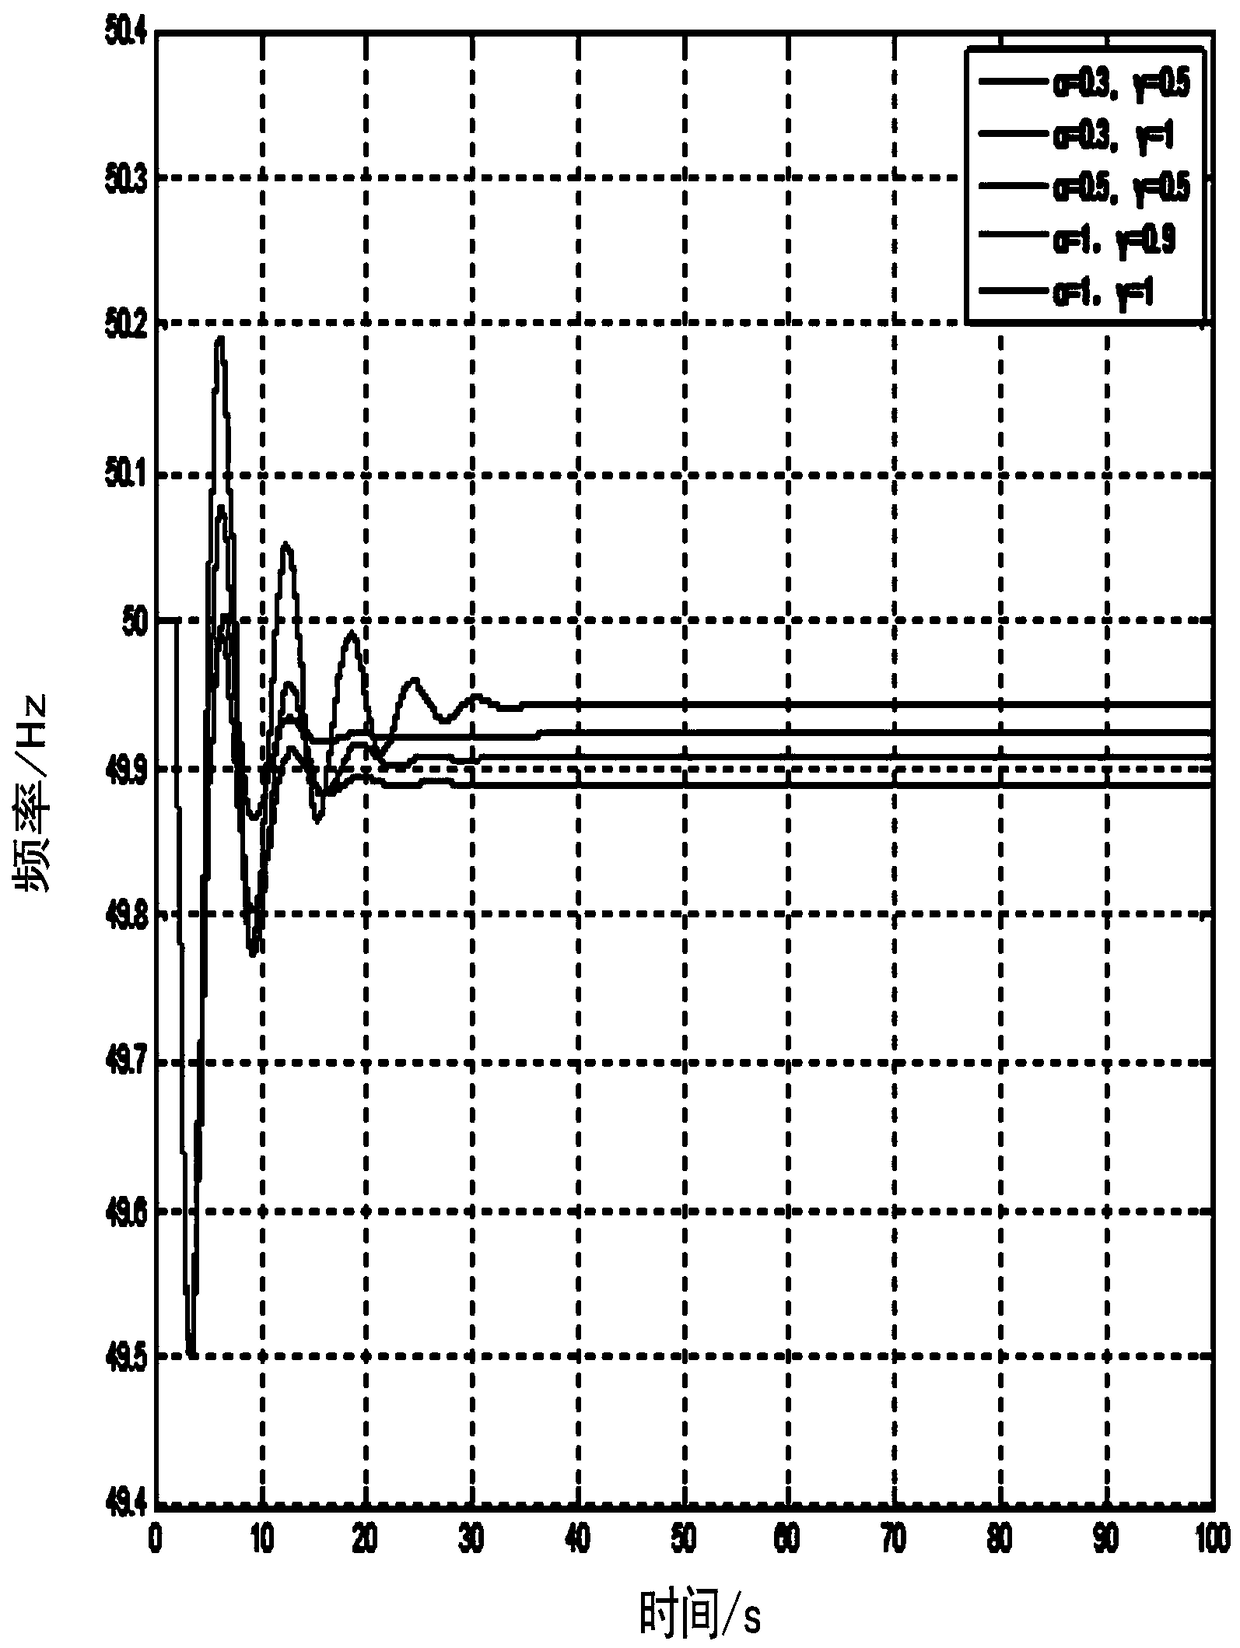 Active and passive frequency response compound control method